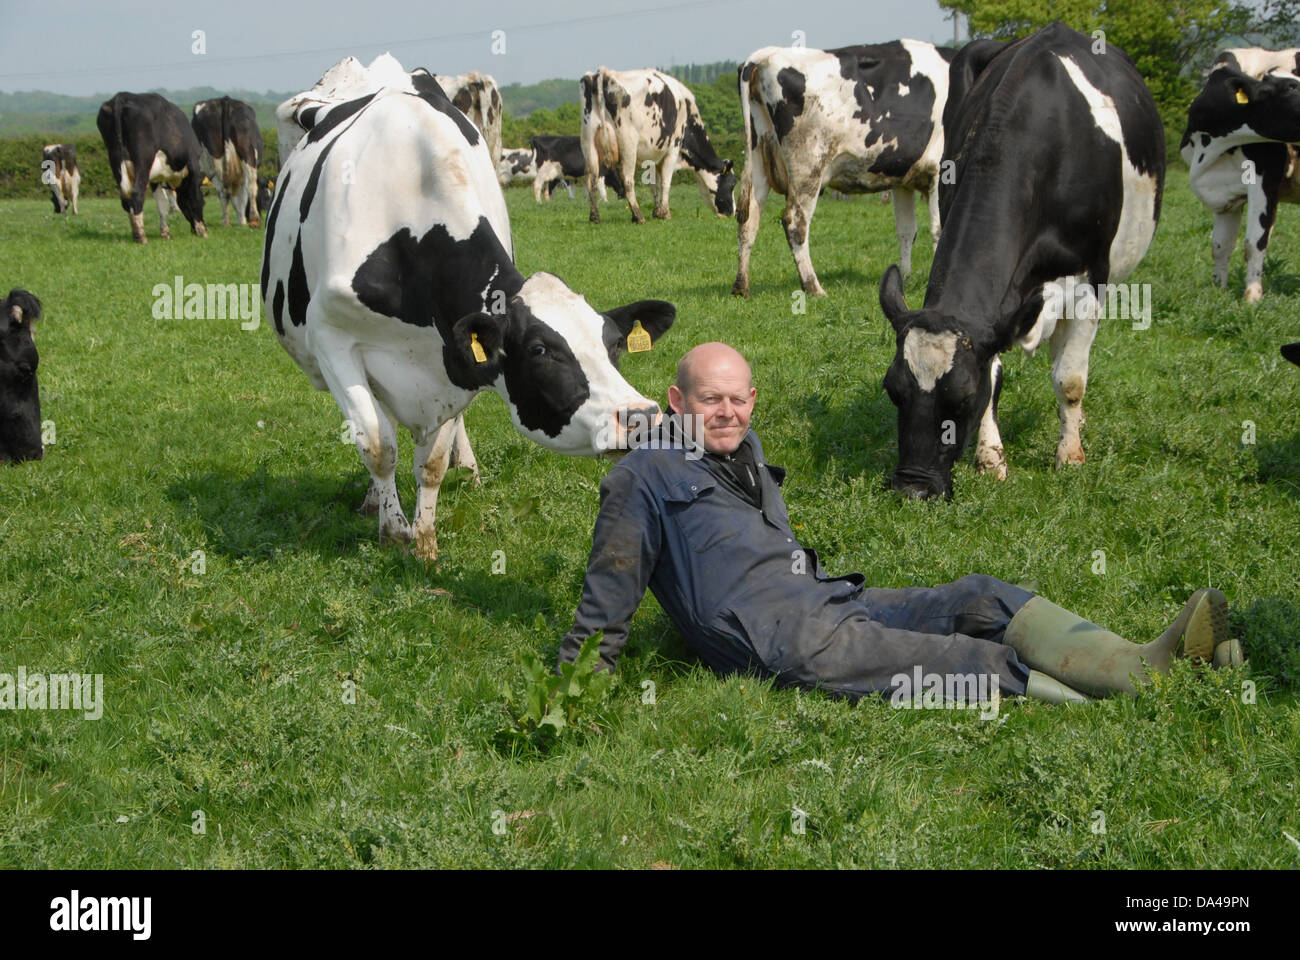 Dairy farmer Steve Hook with Friesian cows in herd on organic dairy farm featured in 'The Moo Man' documentary film Hook and Stock Photo